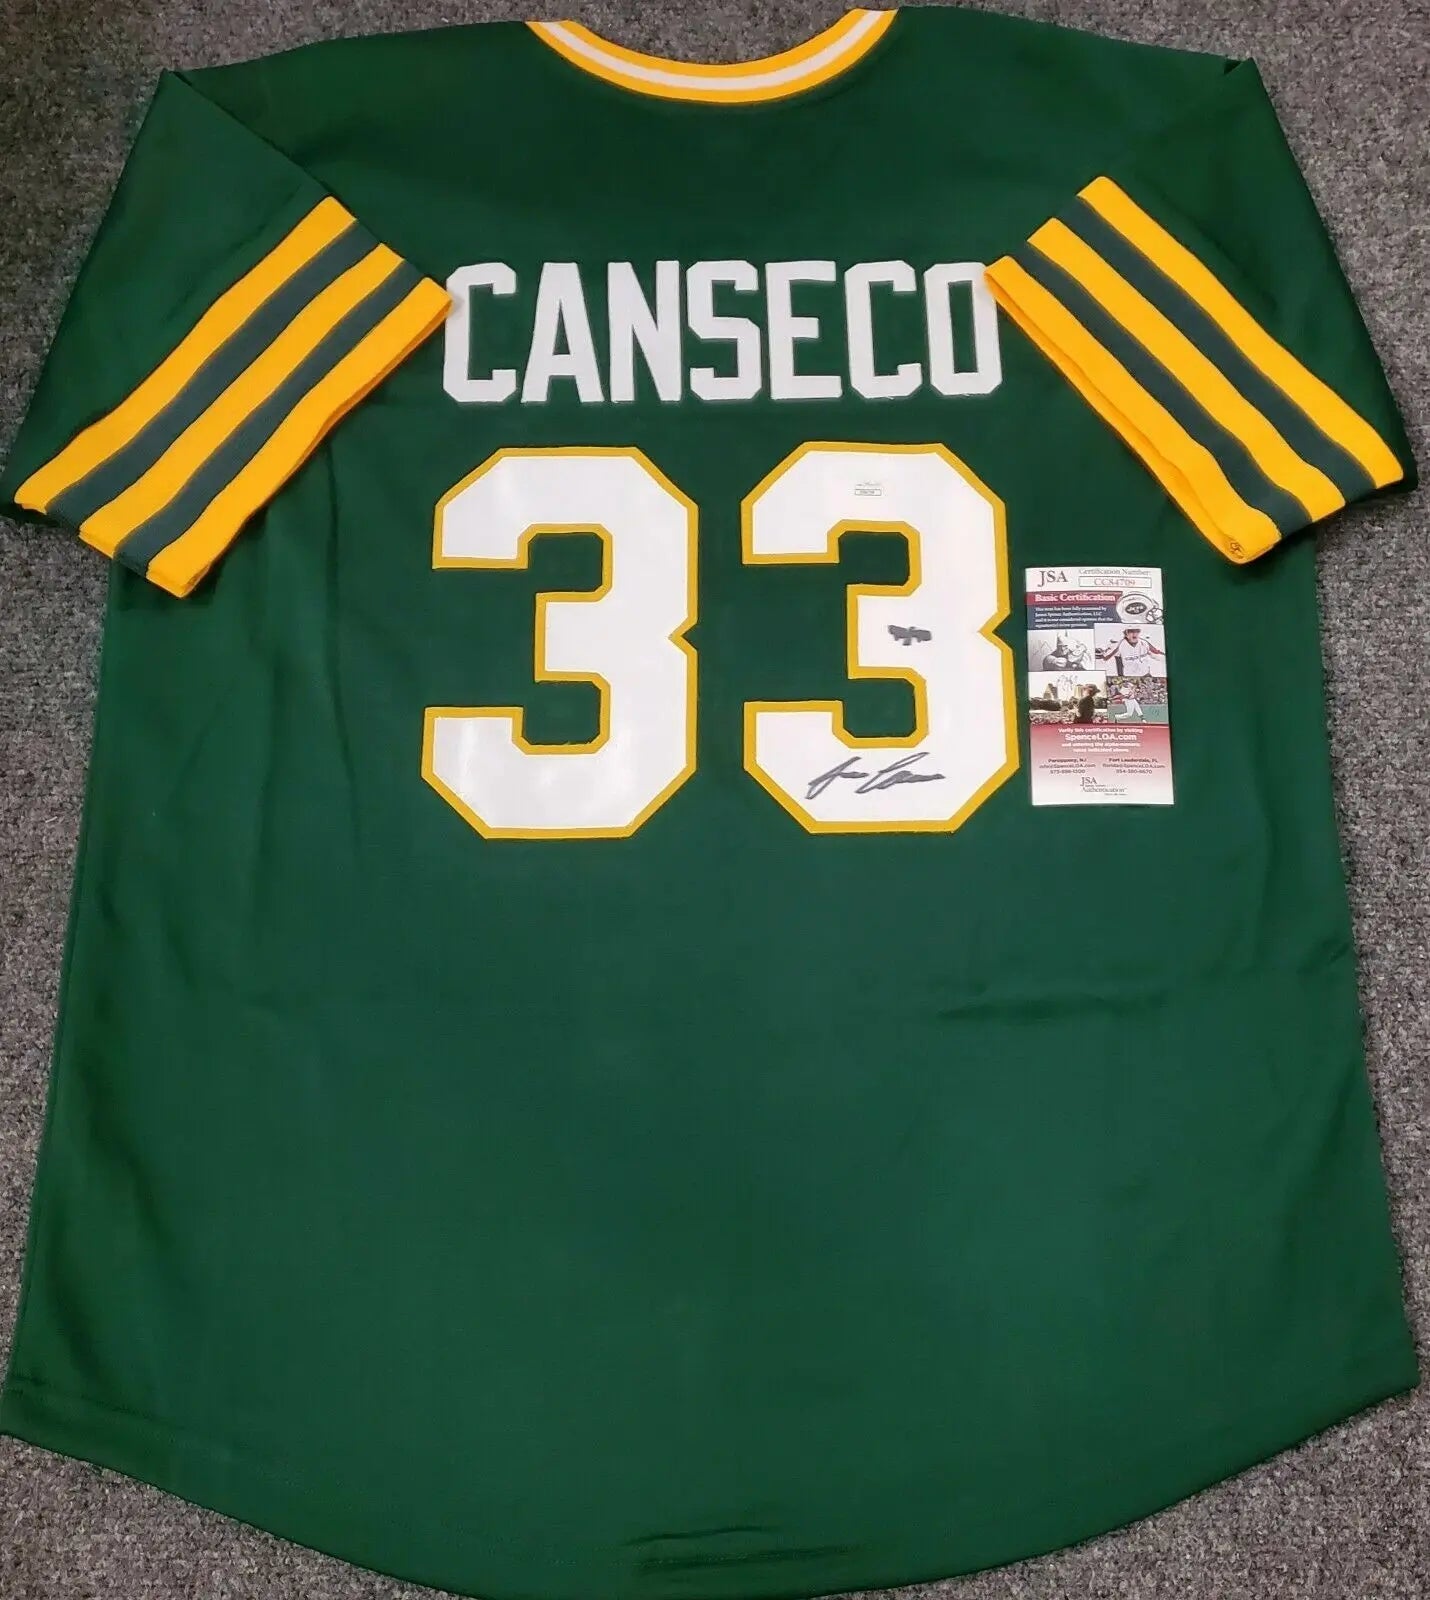 Framed Jose Canseco Autographed Signed Oakland A's Jersey Jsa Coa